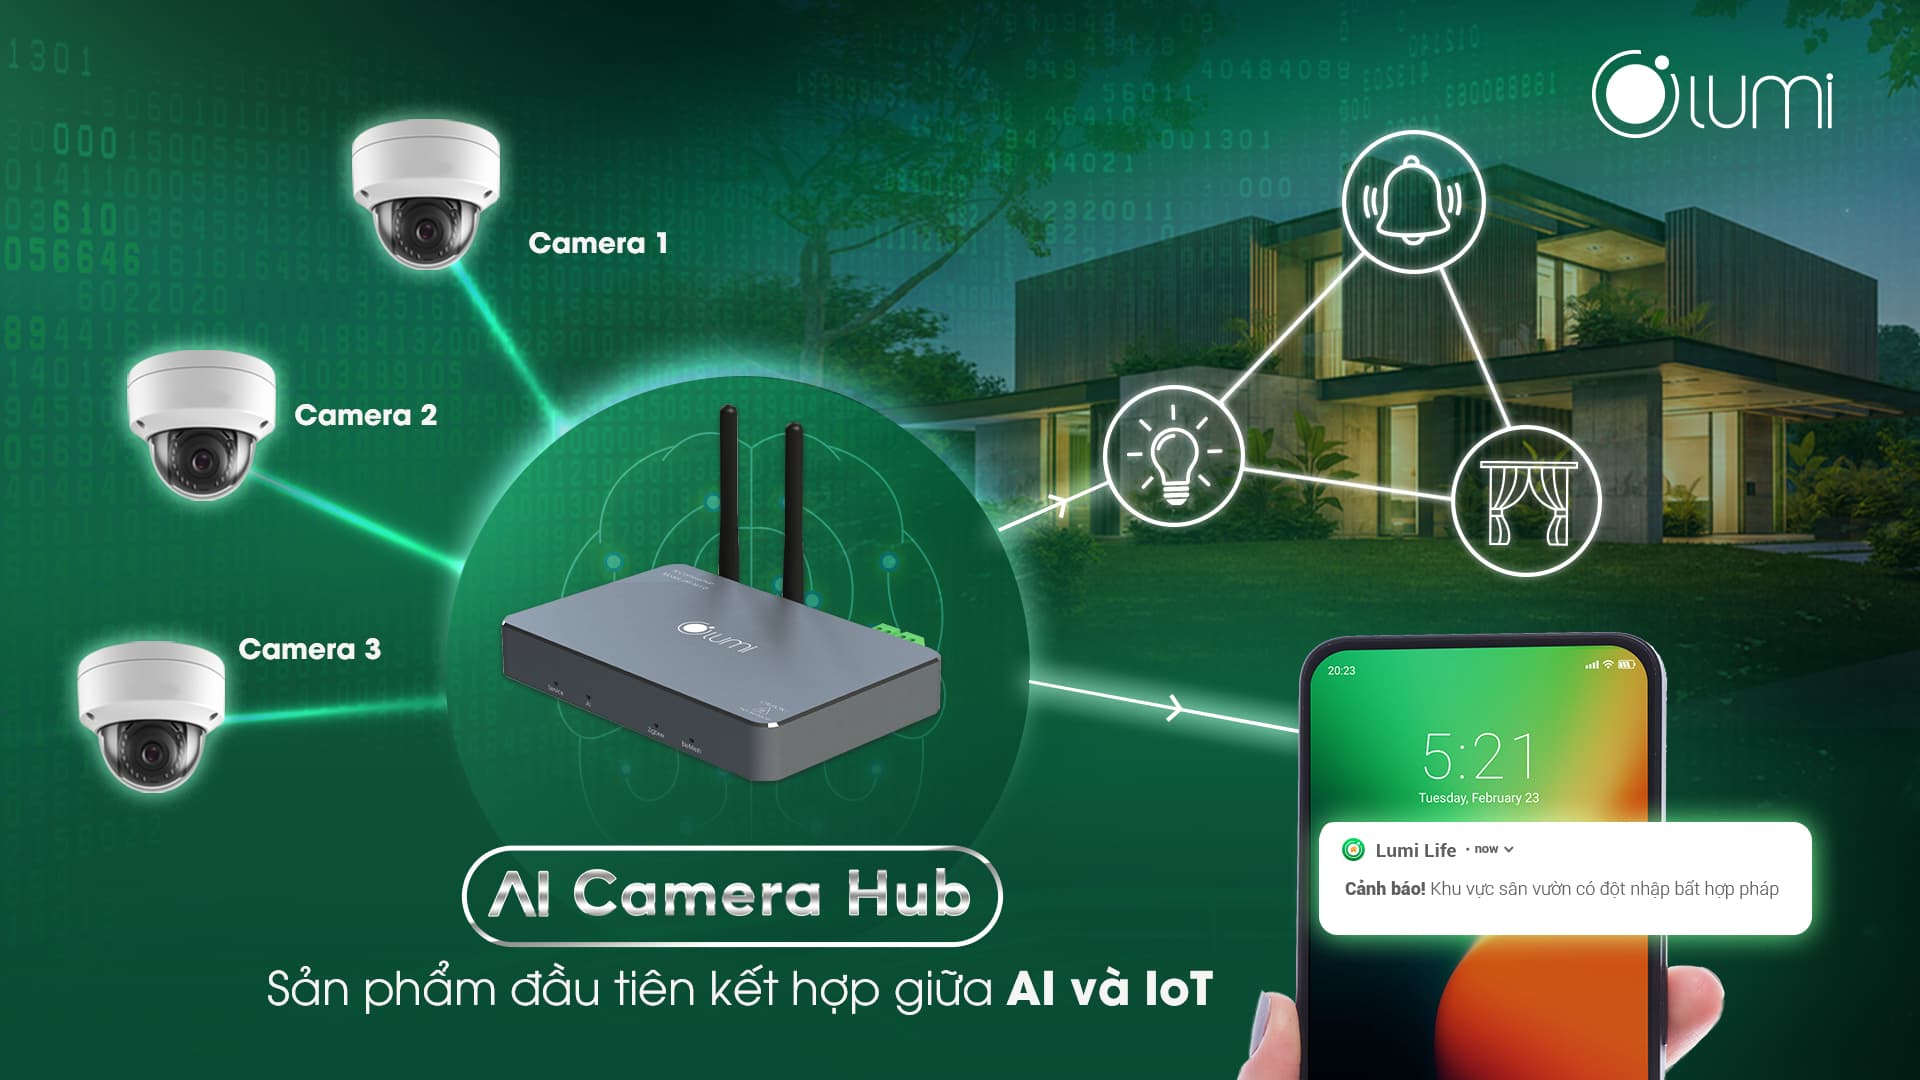 The first product to combine AI and IOT - AI Camera Hub